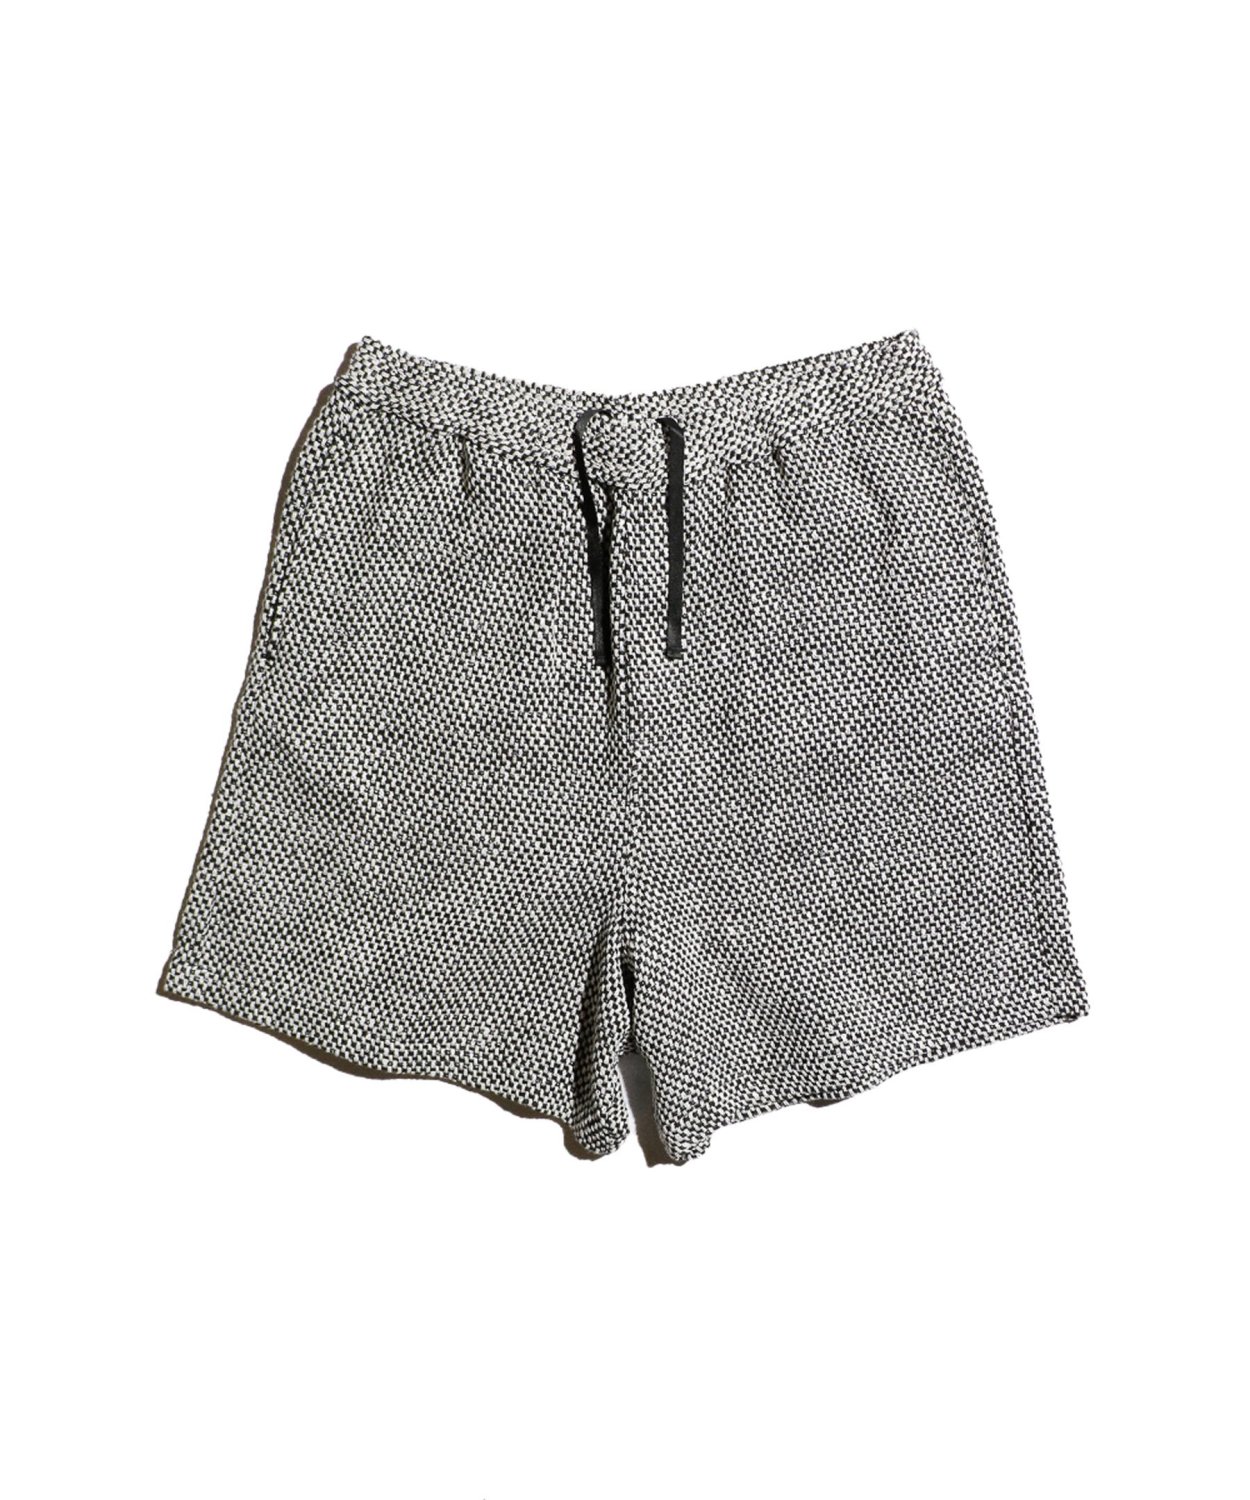 WILLY CHAVARRIA / TWEED SHORTS LINTON